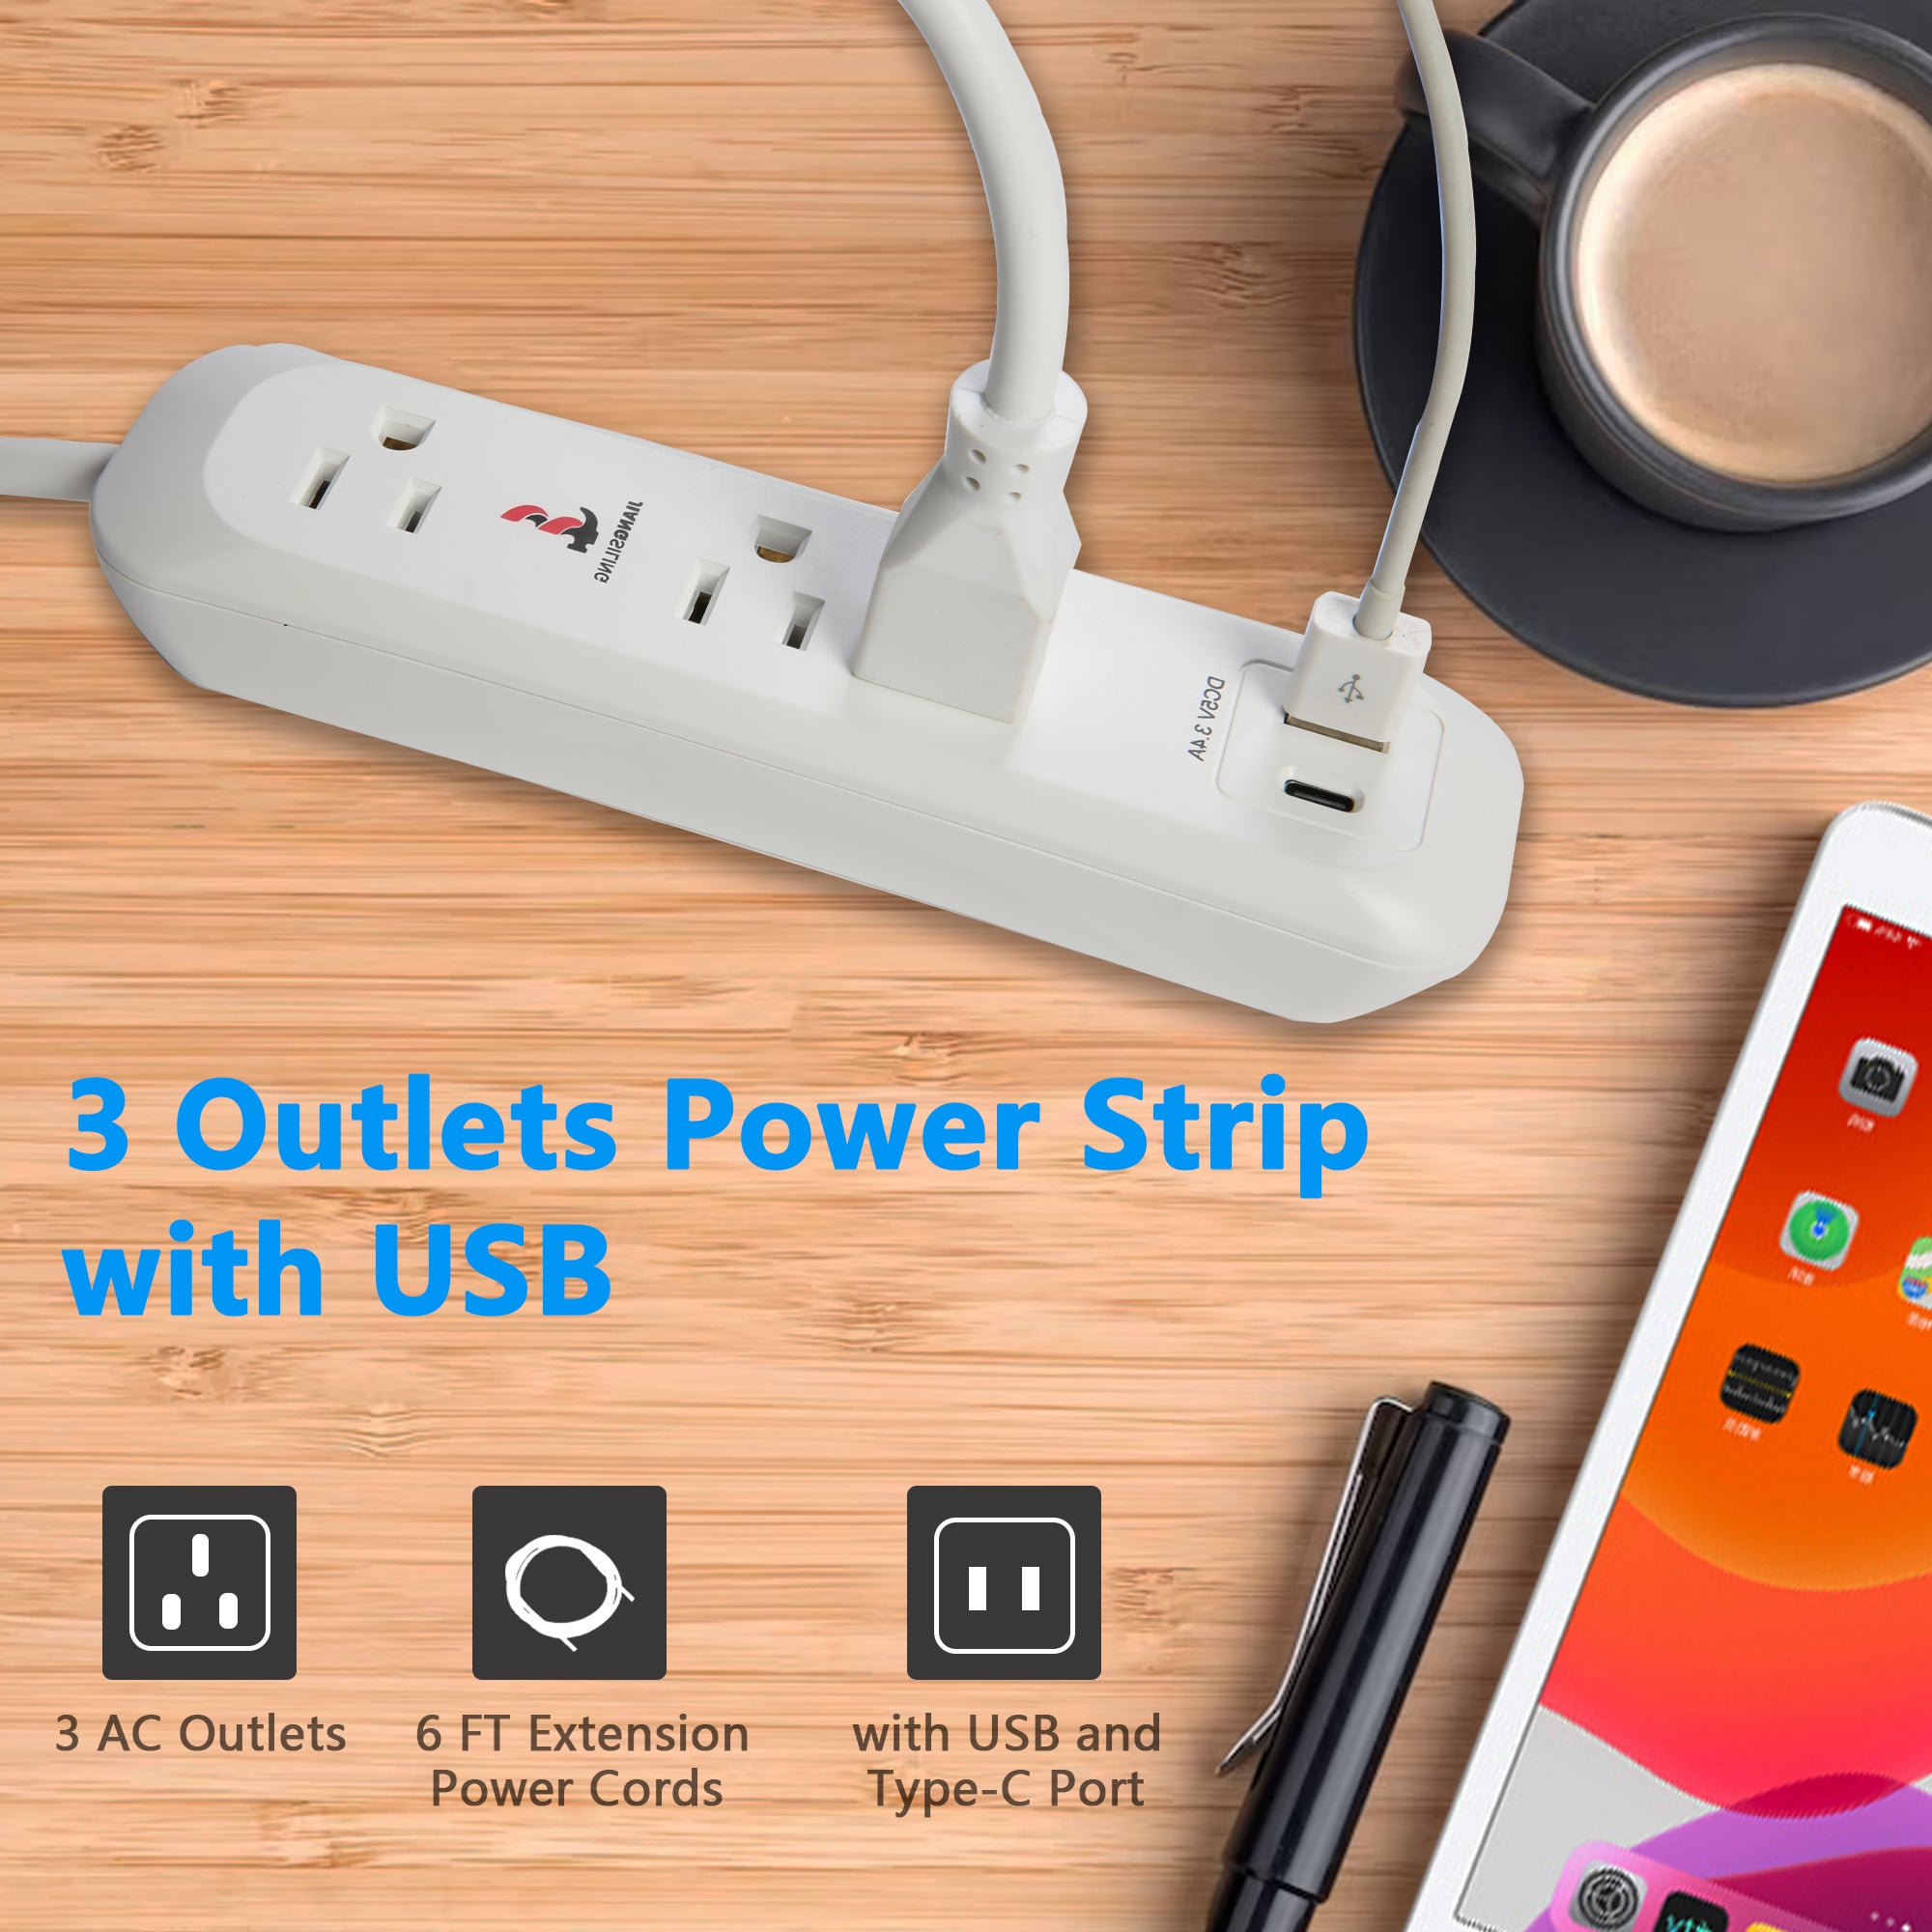 Set of 2 Power Strip 3 Outlet 1 USB Port 1 Type-C Port with Surge Protectorfor Office Home Travel